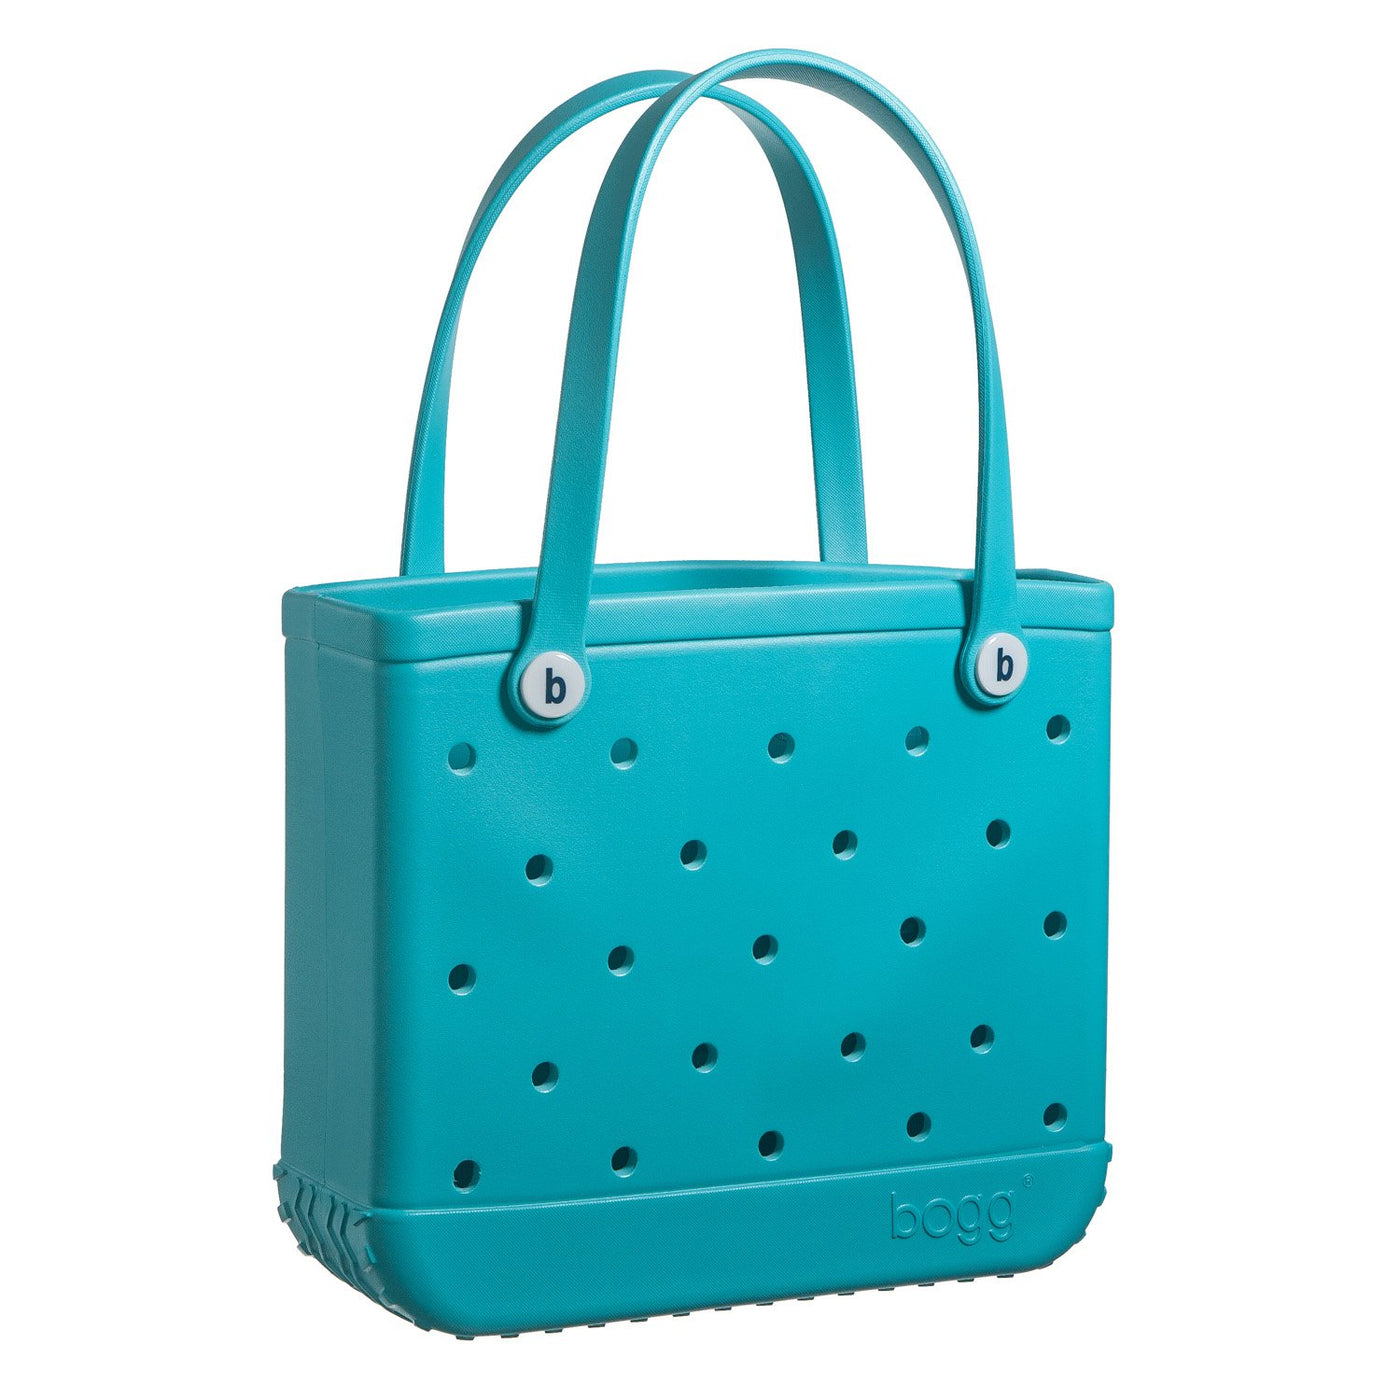 Bogg Bag Baby Bogg: Turquoise and Caicos